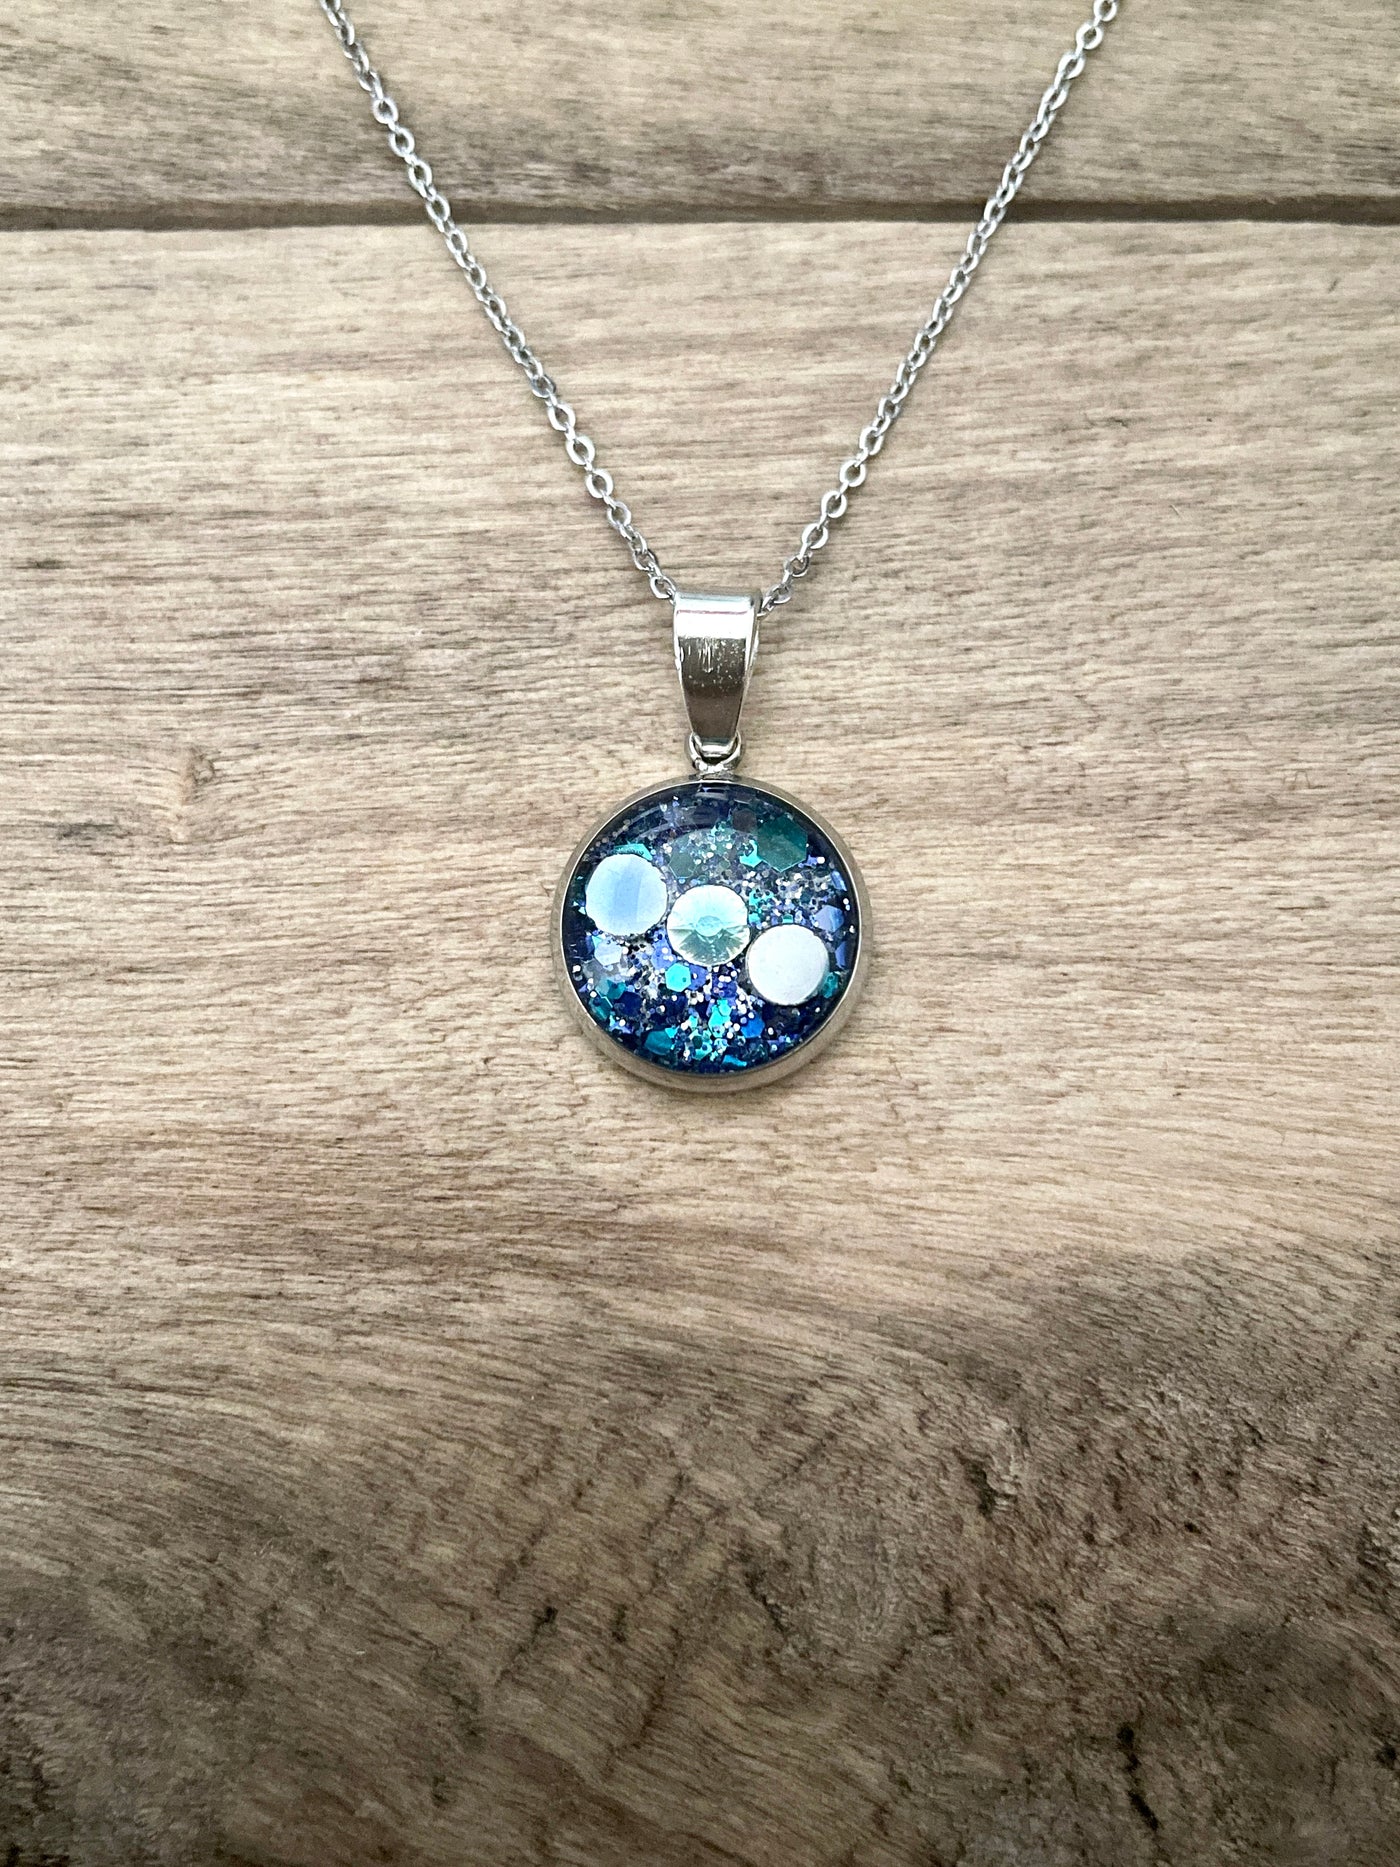 Running sales: Simple silver necklace